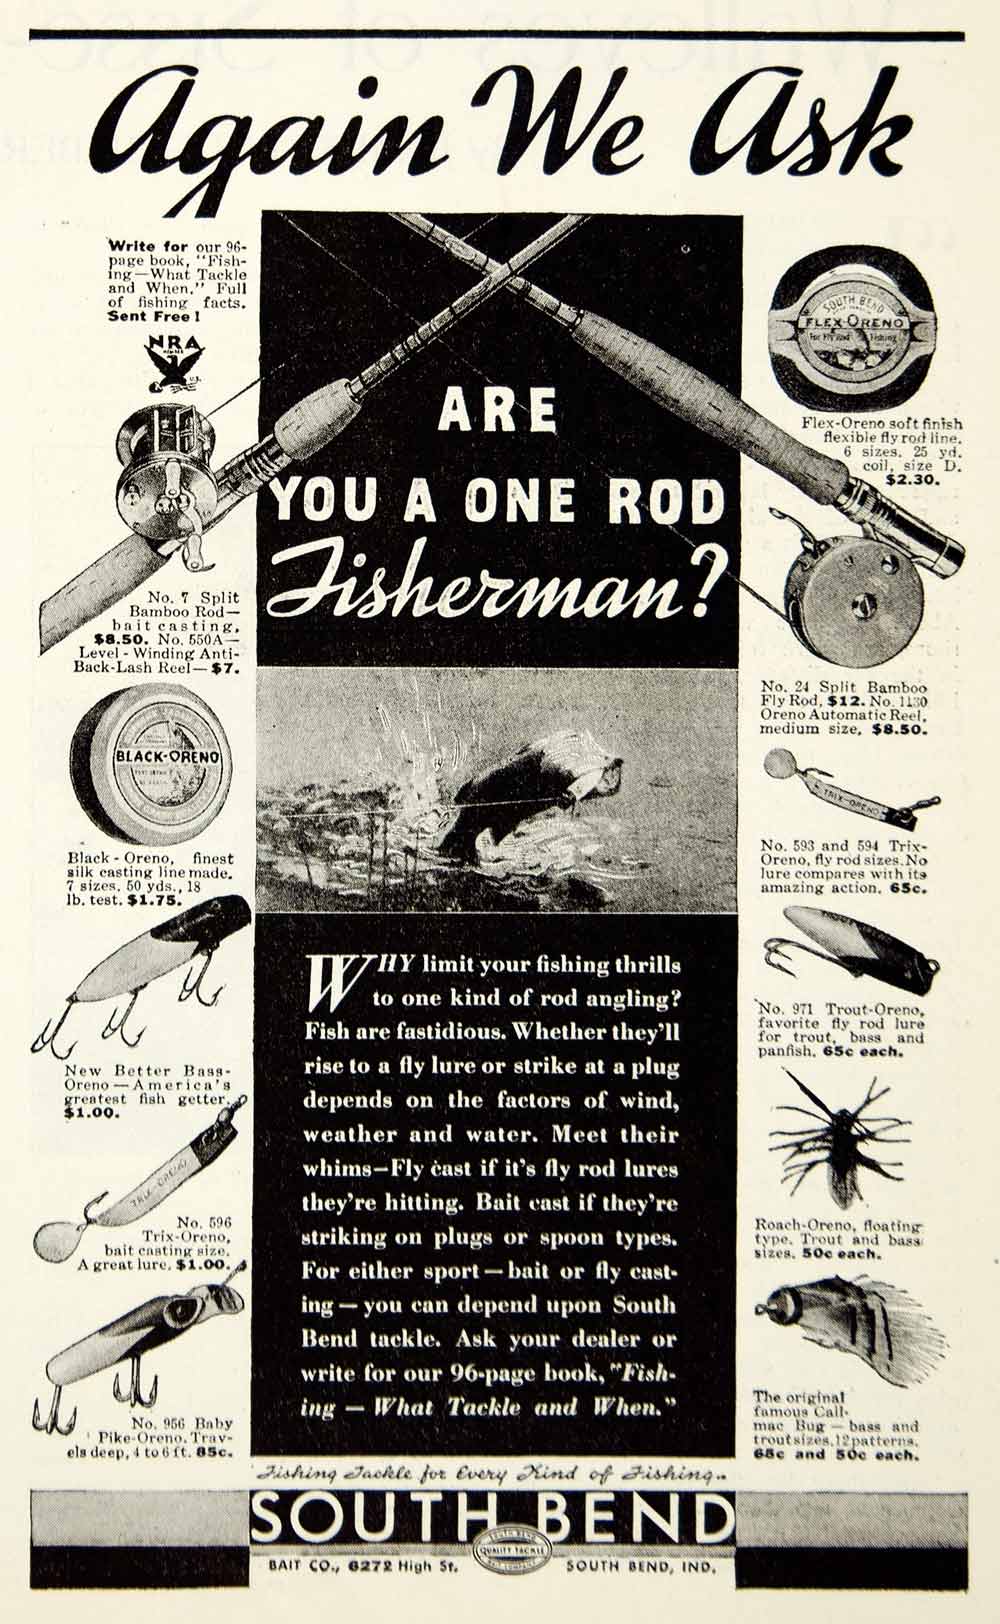 1934 Ad South Bend Fishing Rod Casting Line Lure Bait Tackle 6272 High St  YHTT1